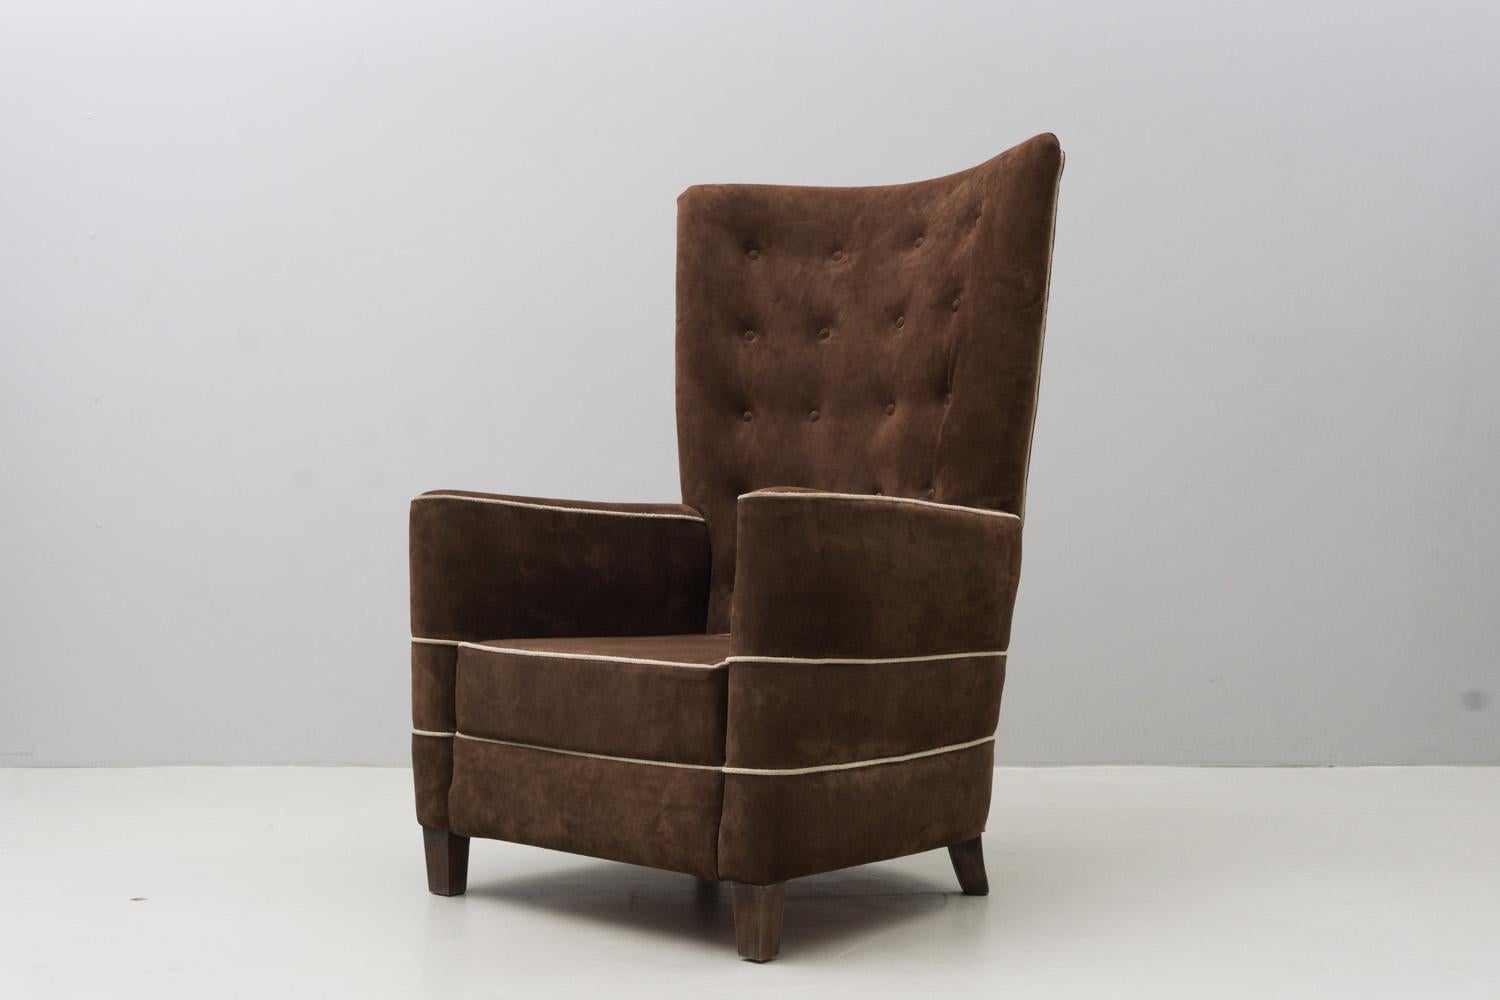 Pair of Brown Suede Armchairs, Guglielmo Ulrich, 1936 In Good Condition For Sale In Berlin, DE